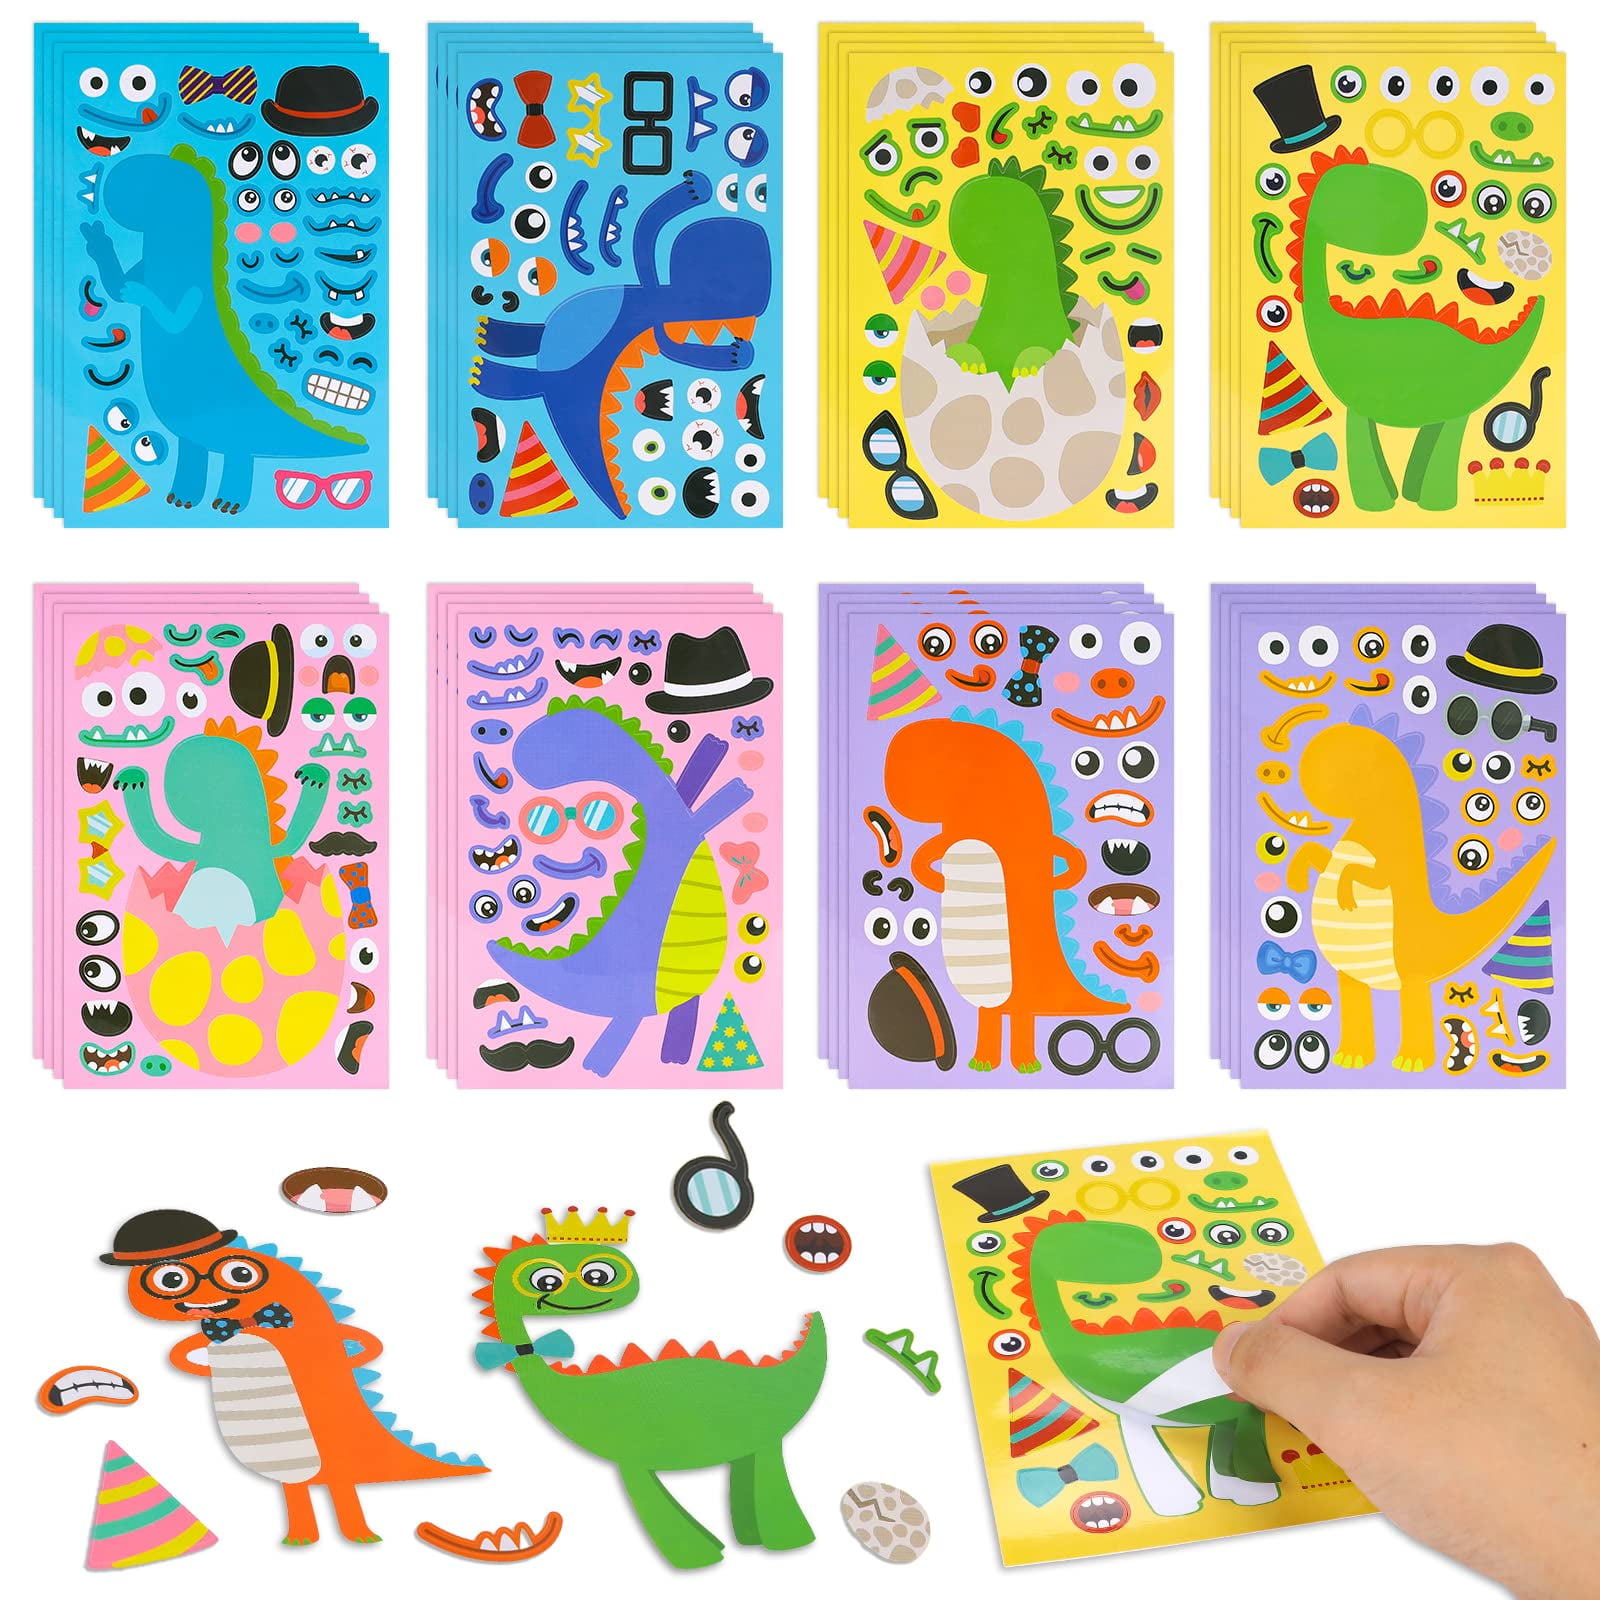 32 Make A Dinosaur Stickers for Kids, Dinosaur Party Favors Decoration  Gifts Dinosaur Toys for 3 4 5 Year Old, Kids Boys Dino Crafts Kits,  Make-a-Face